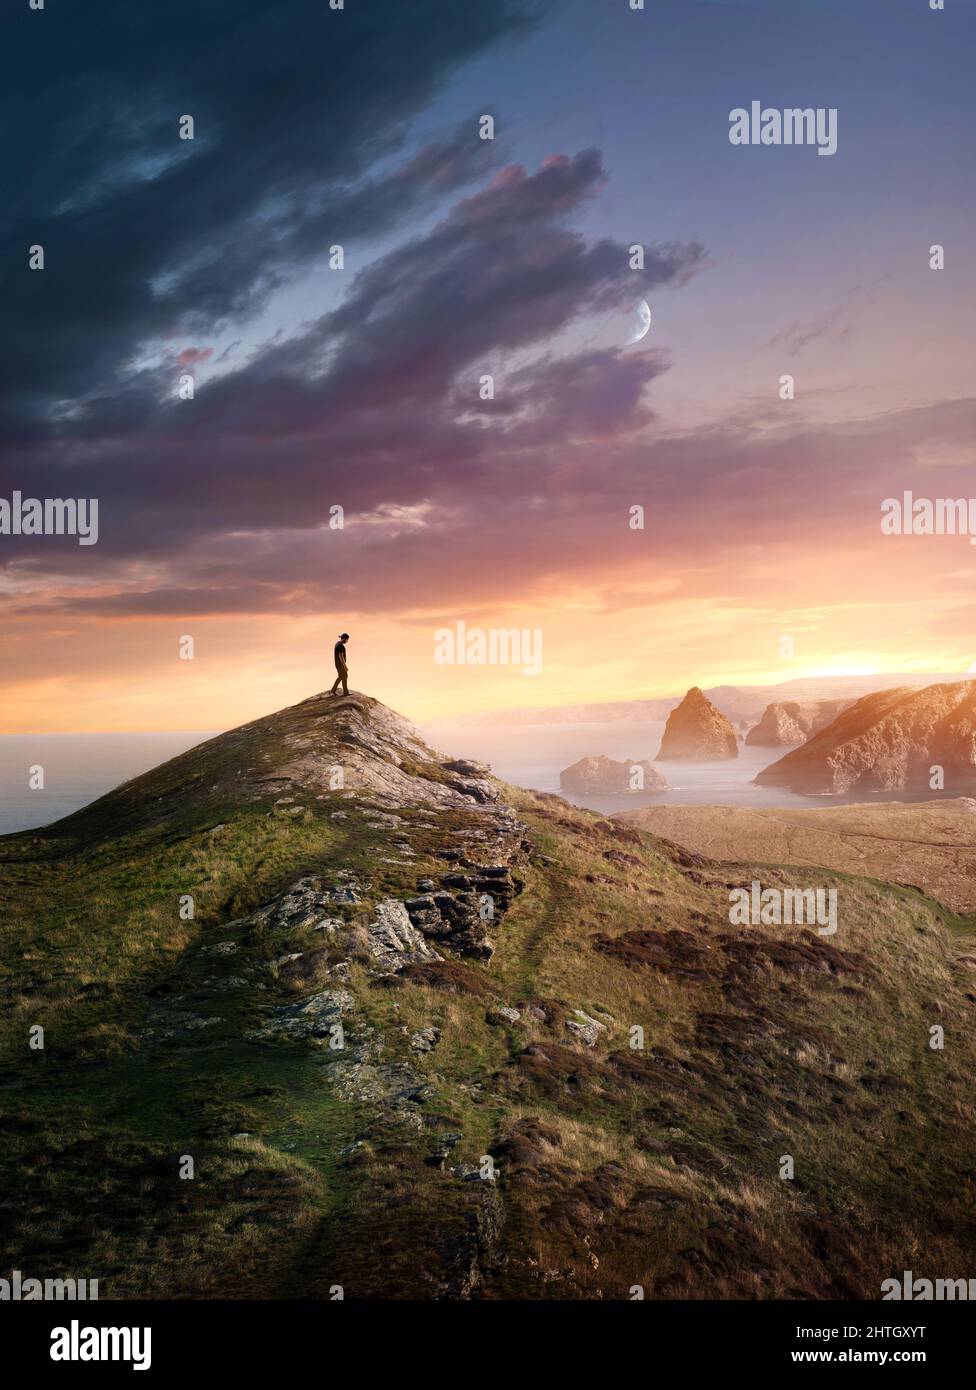 A man hiking to reach the top of a mountain summit at sunset along the UK coastline. Photo composite. Stock Photo